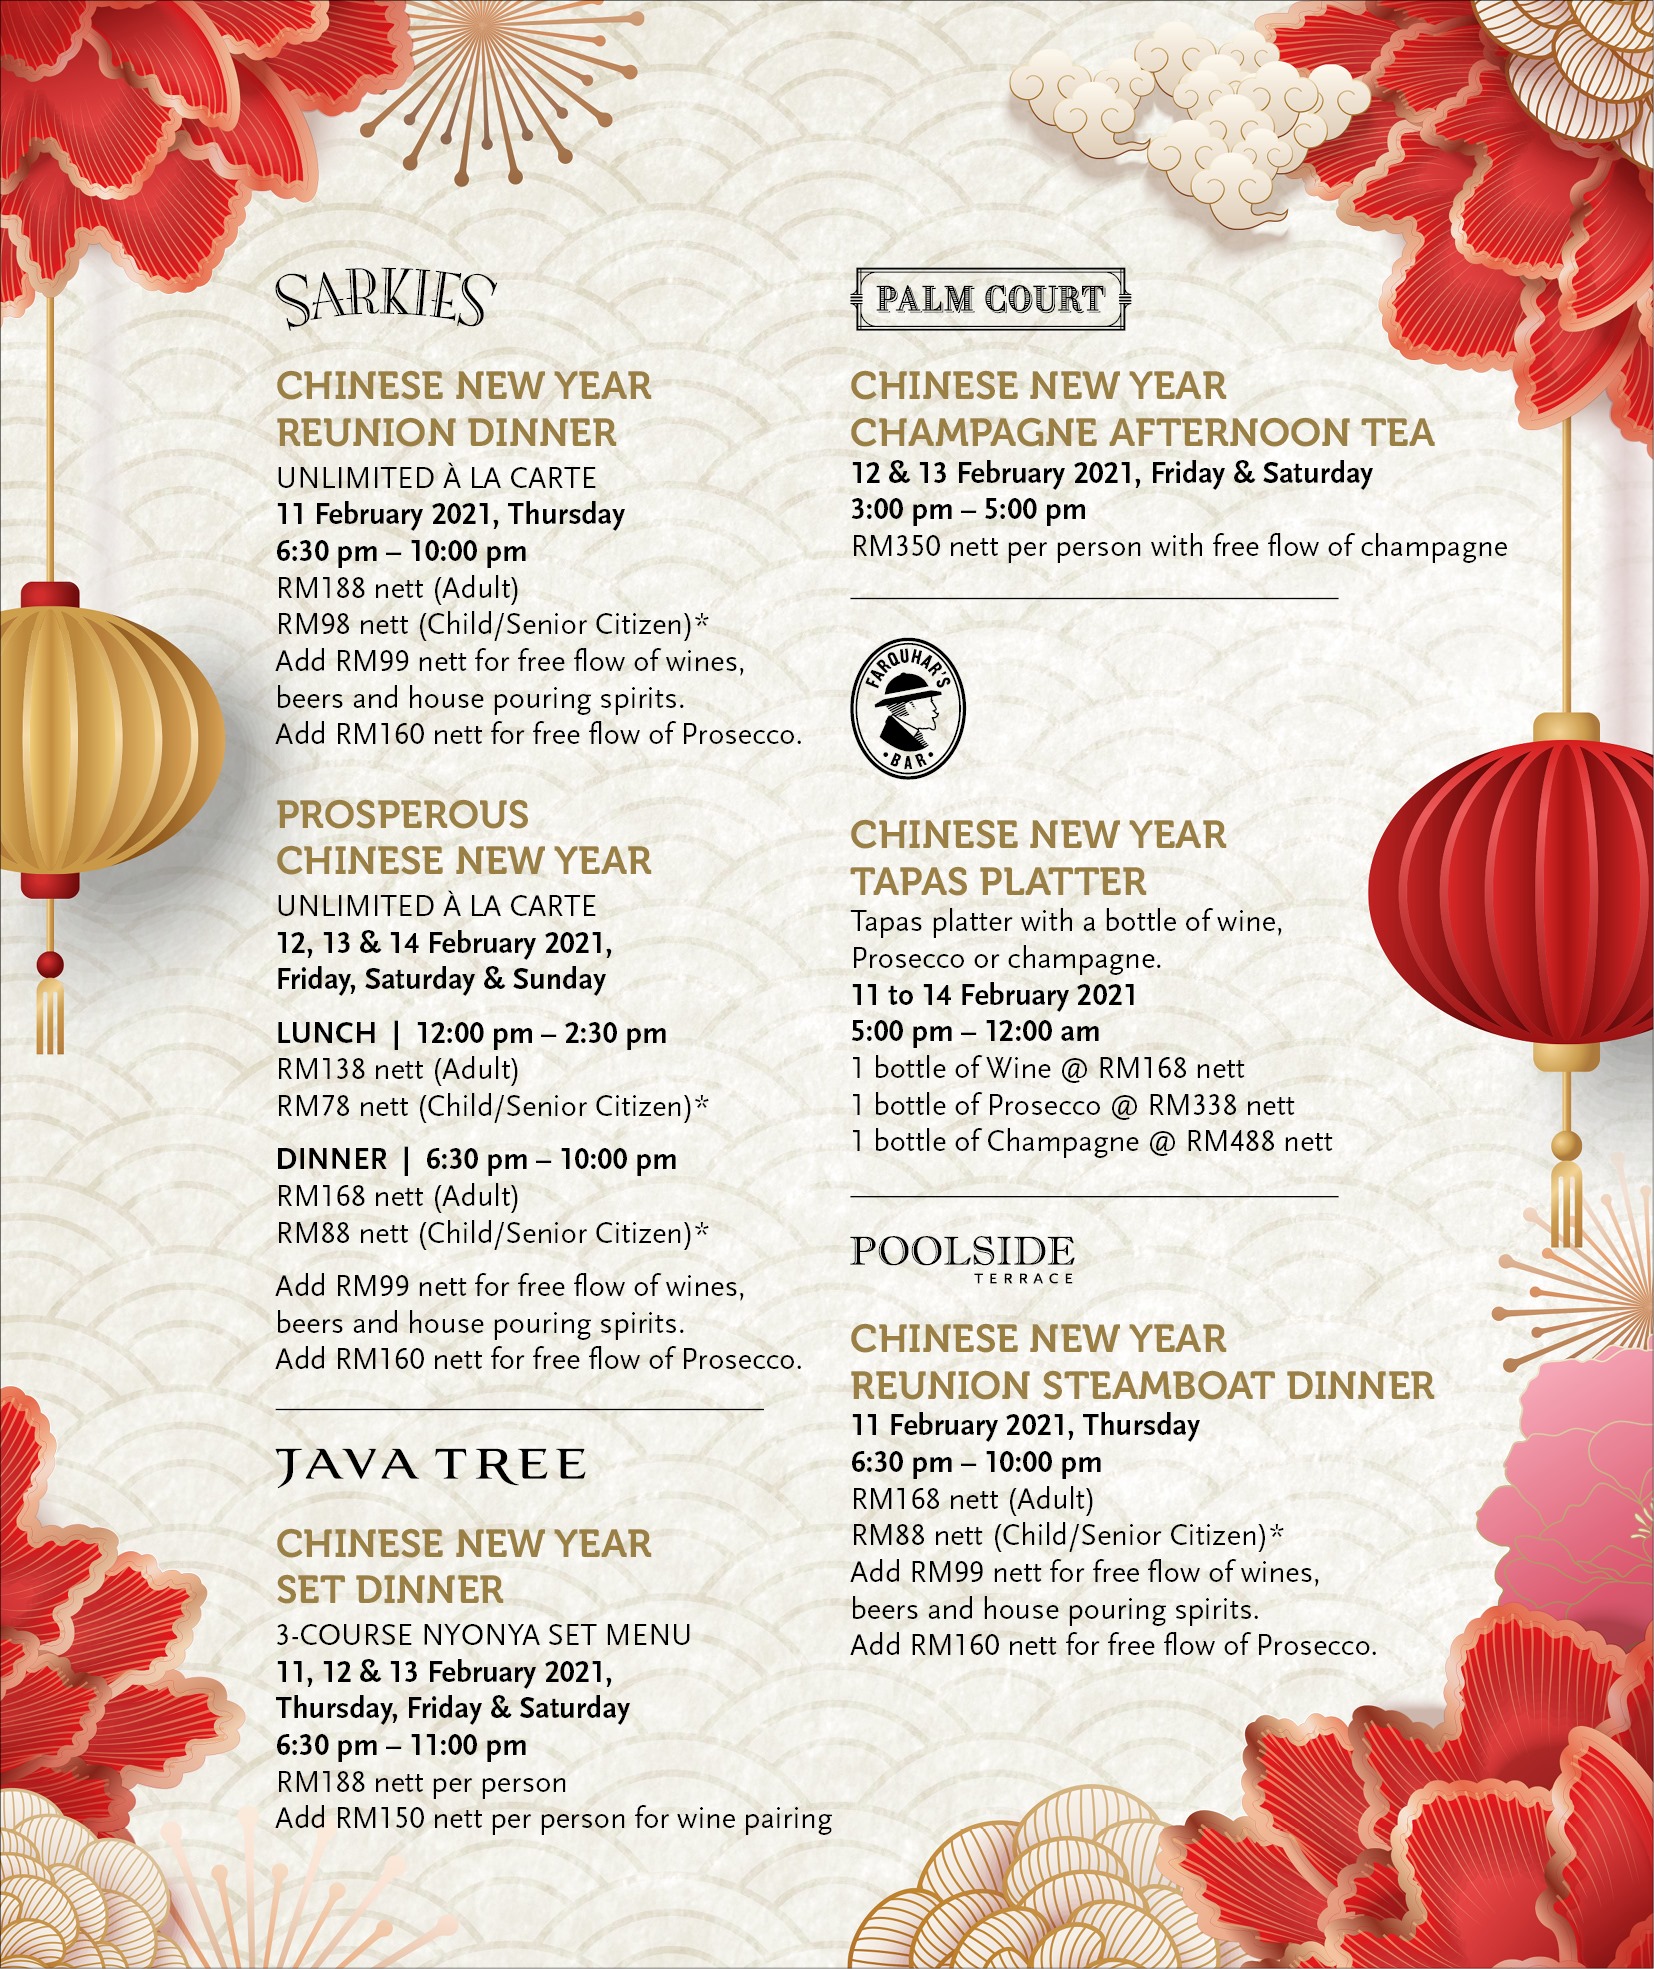 Places To Celebrate Cny Reunion Dinner In Penang The Penangite